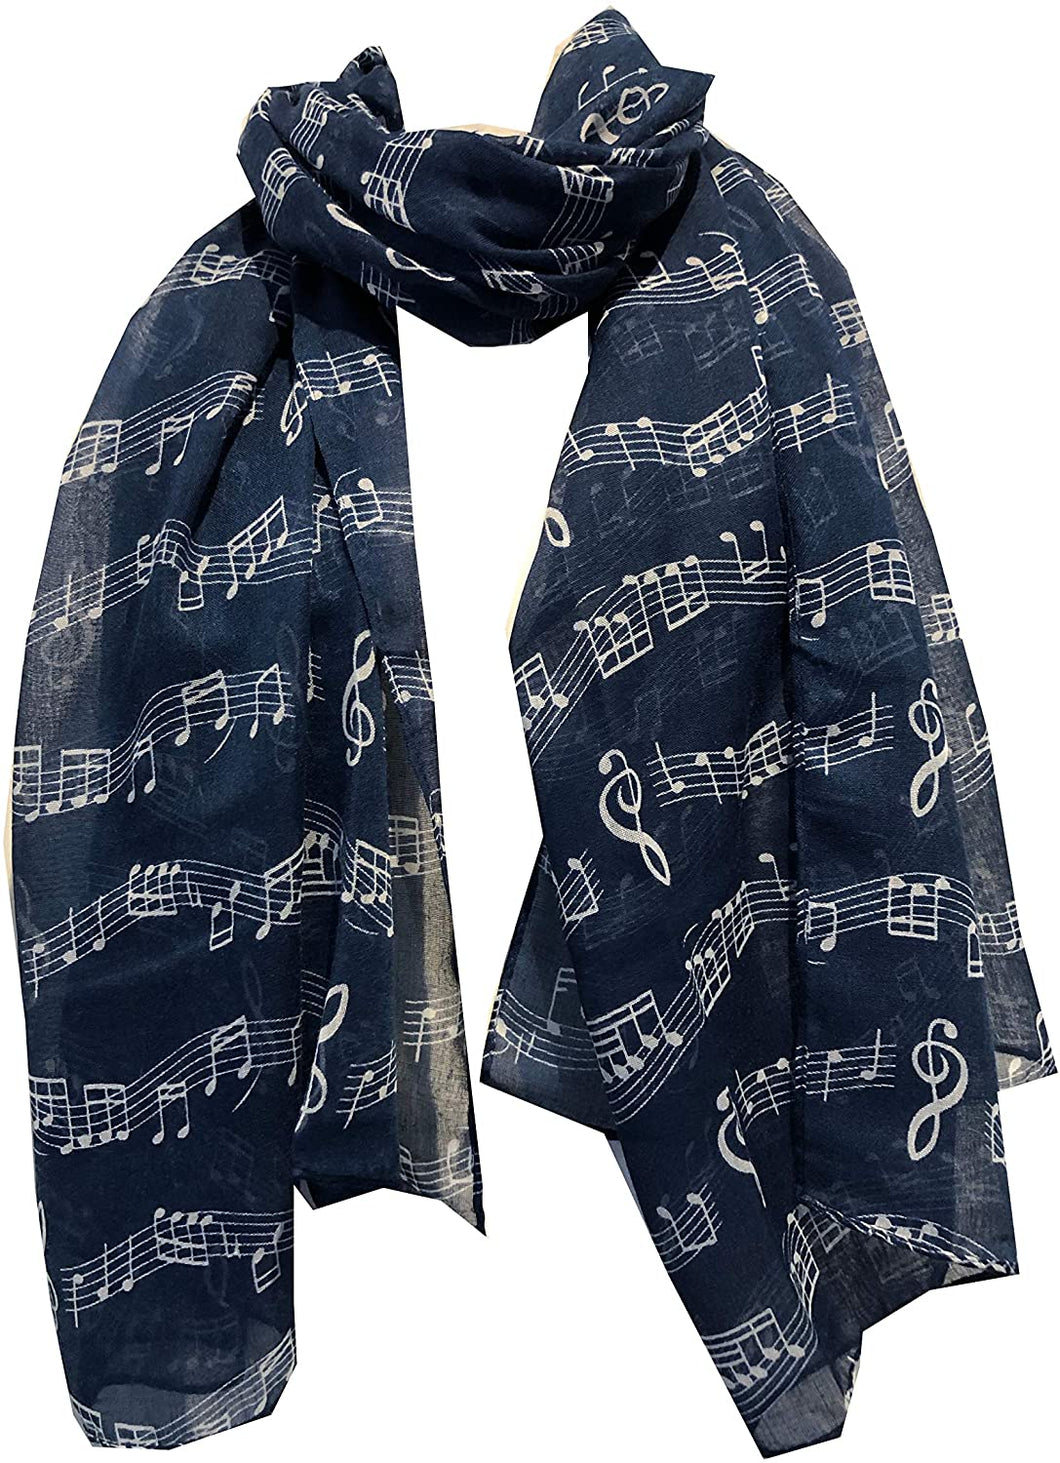 Pamper Yourself Now Big Scarf, Blue with White Music Notes Print Scarf. Lovely Warm Winter Scarf Fantastic Gift